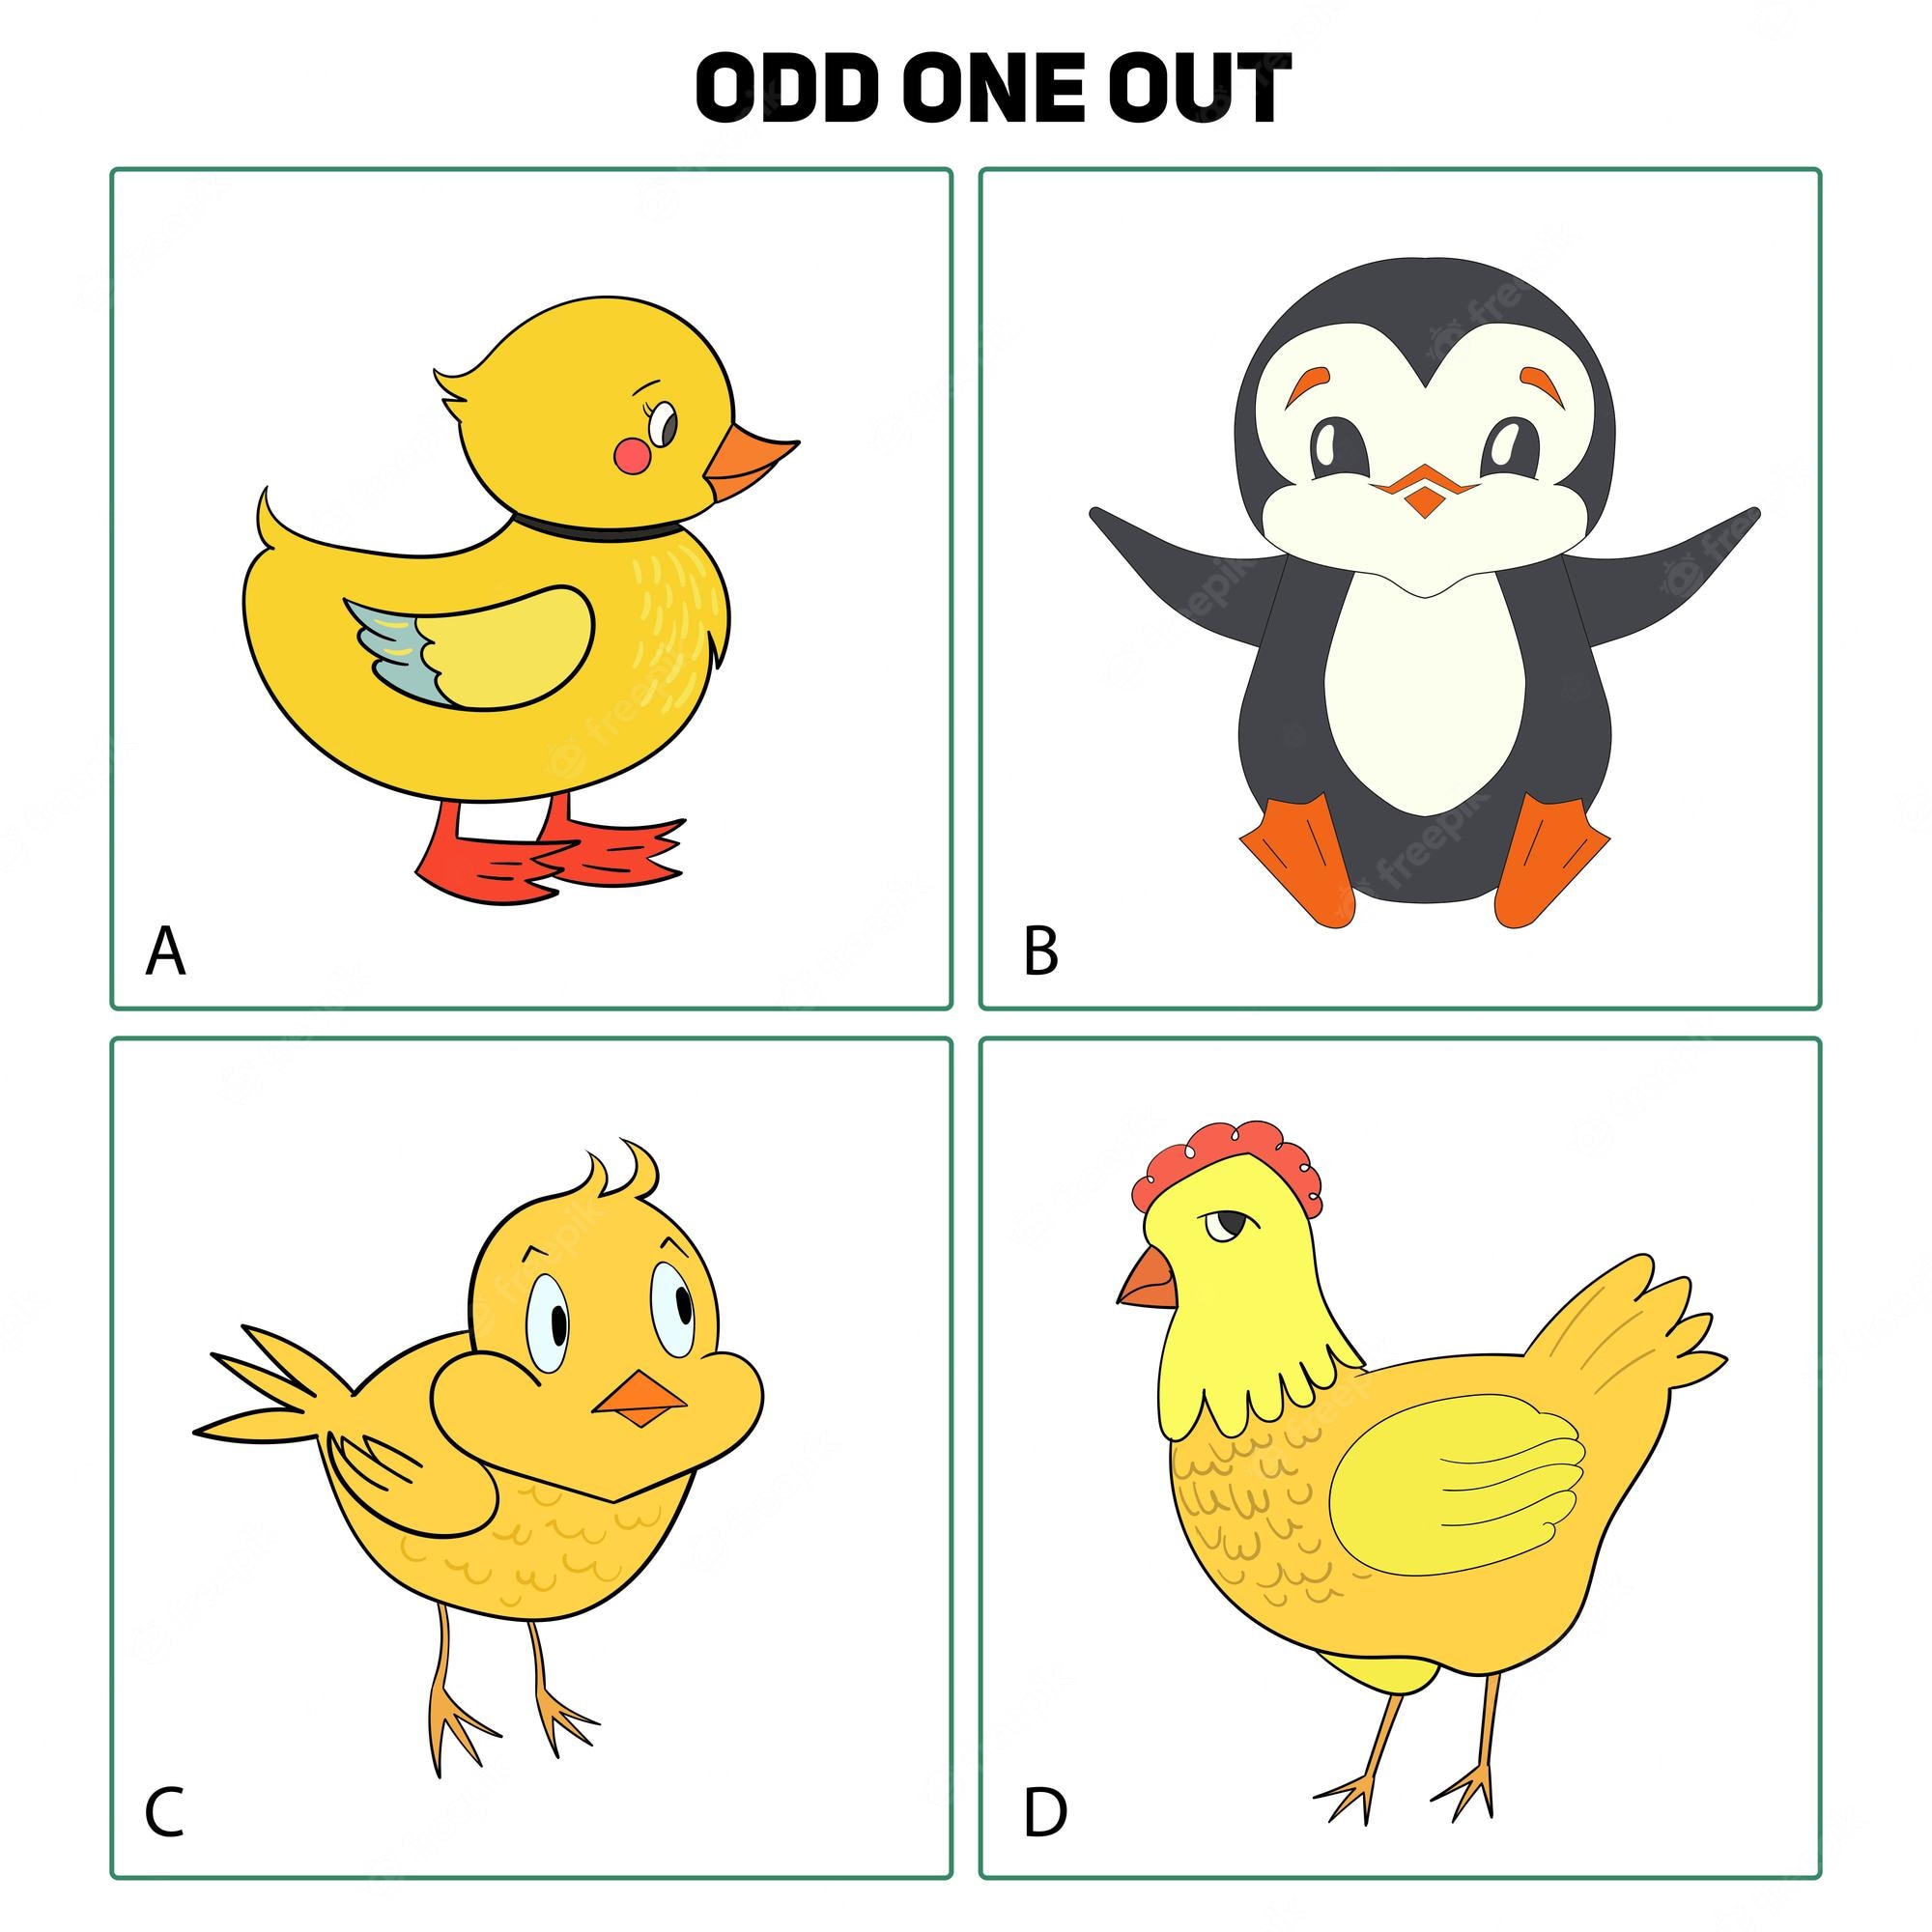 Premium Vector. Odd one out child game vector illustration